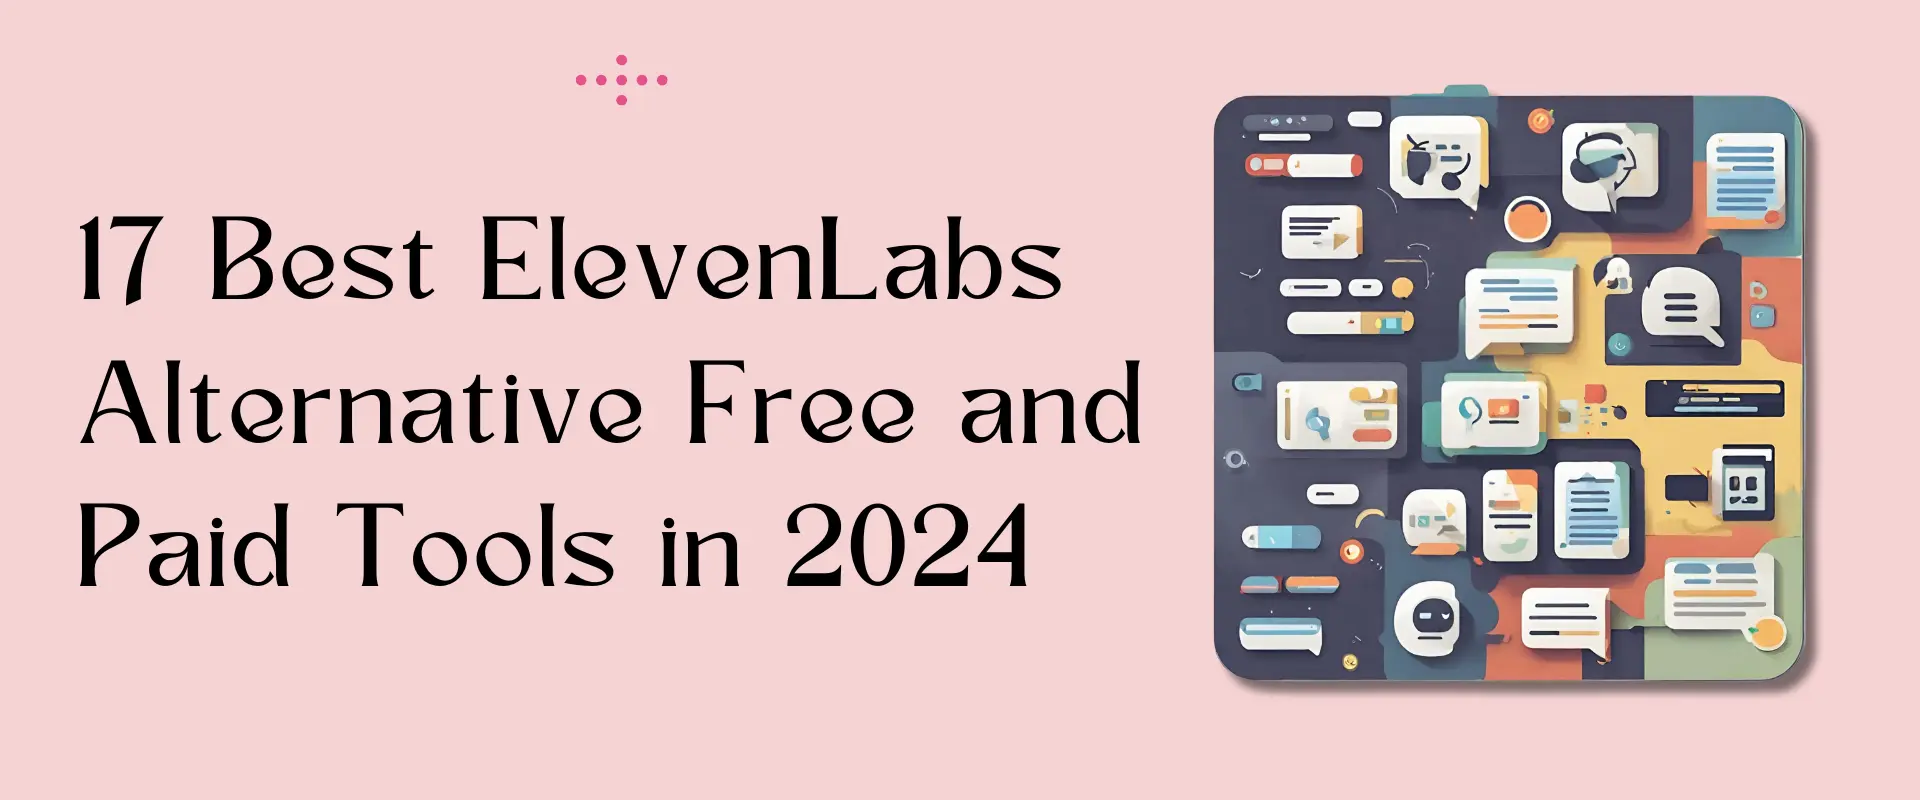 17 Best ElevenLabs Alternative Free and Paid Tools in 2024